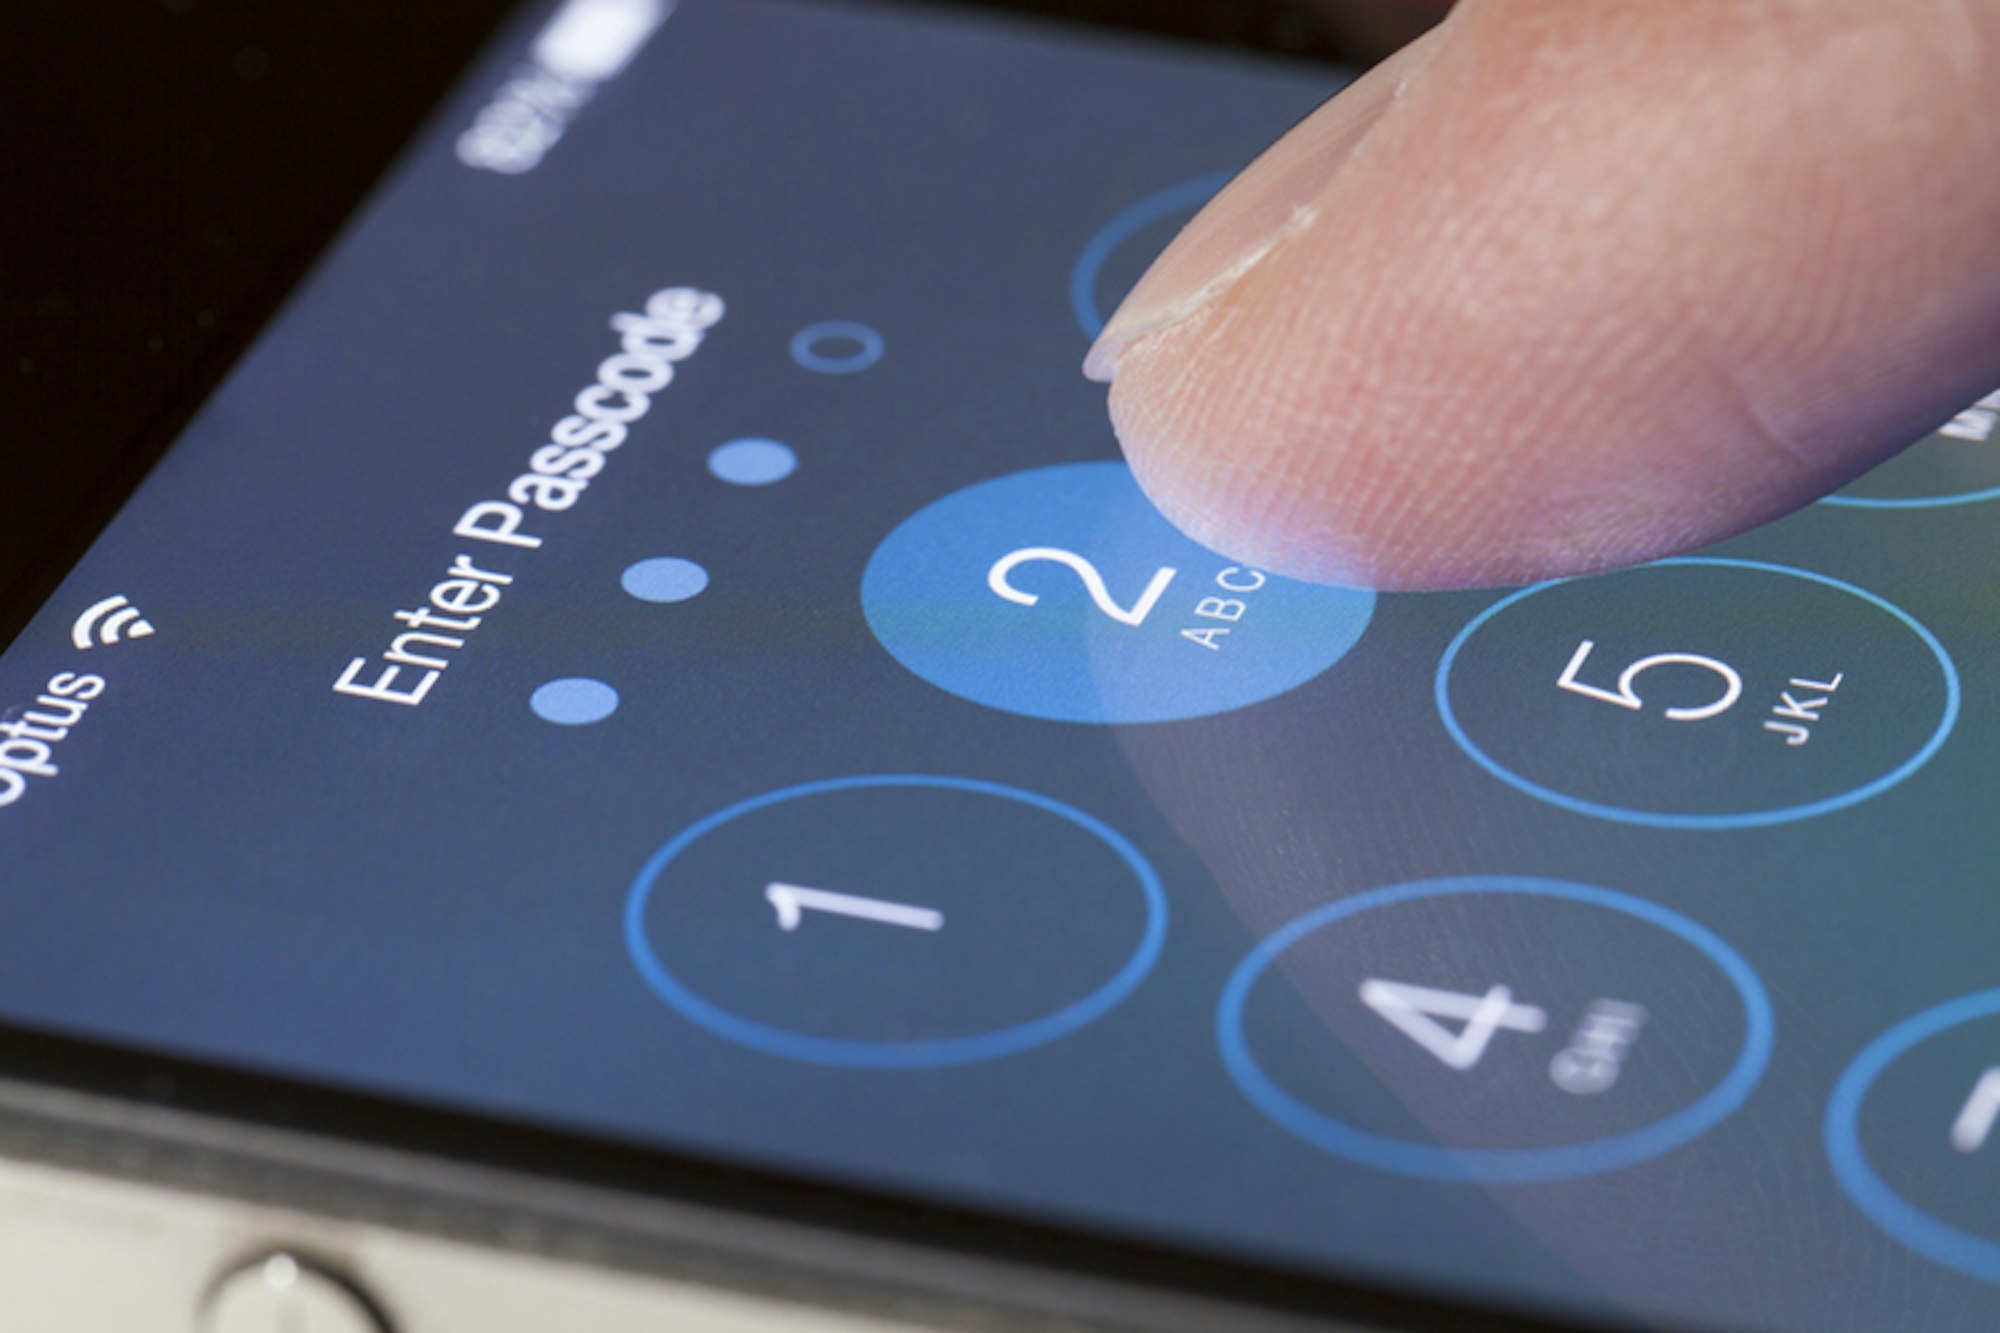 How to know if iPhone is hacked